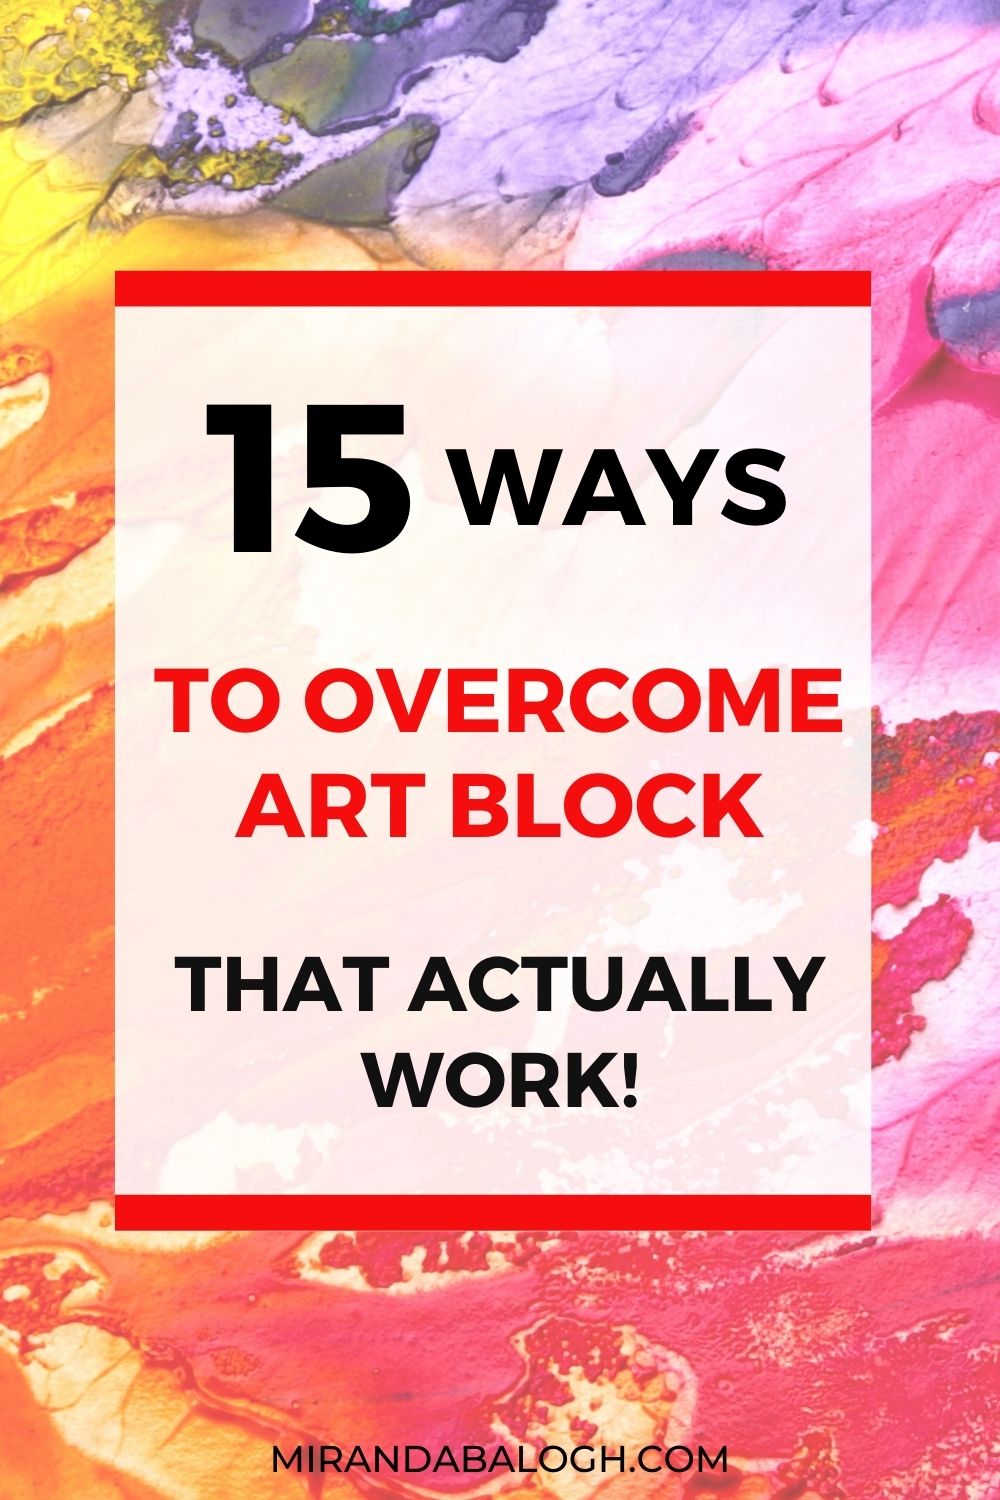 15 Ways To Overcome Art Block (That Actually Work)